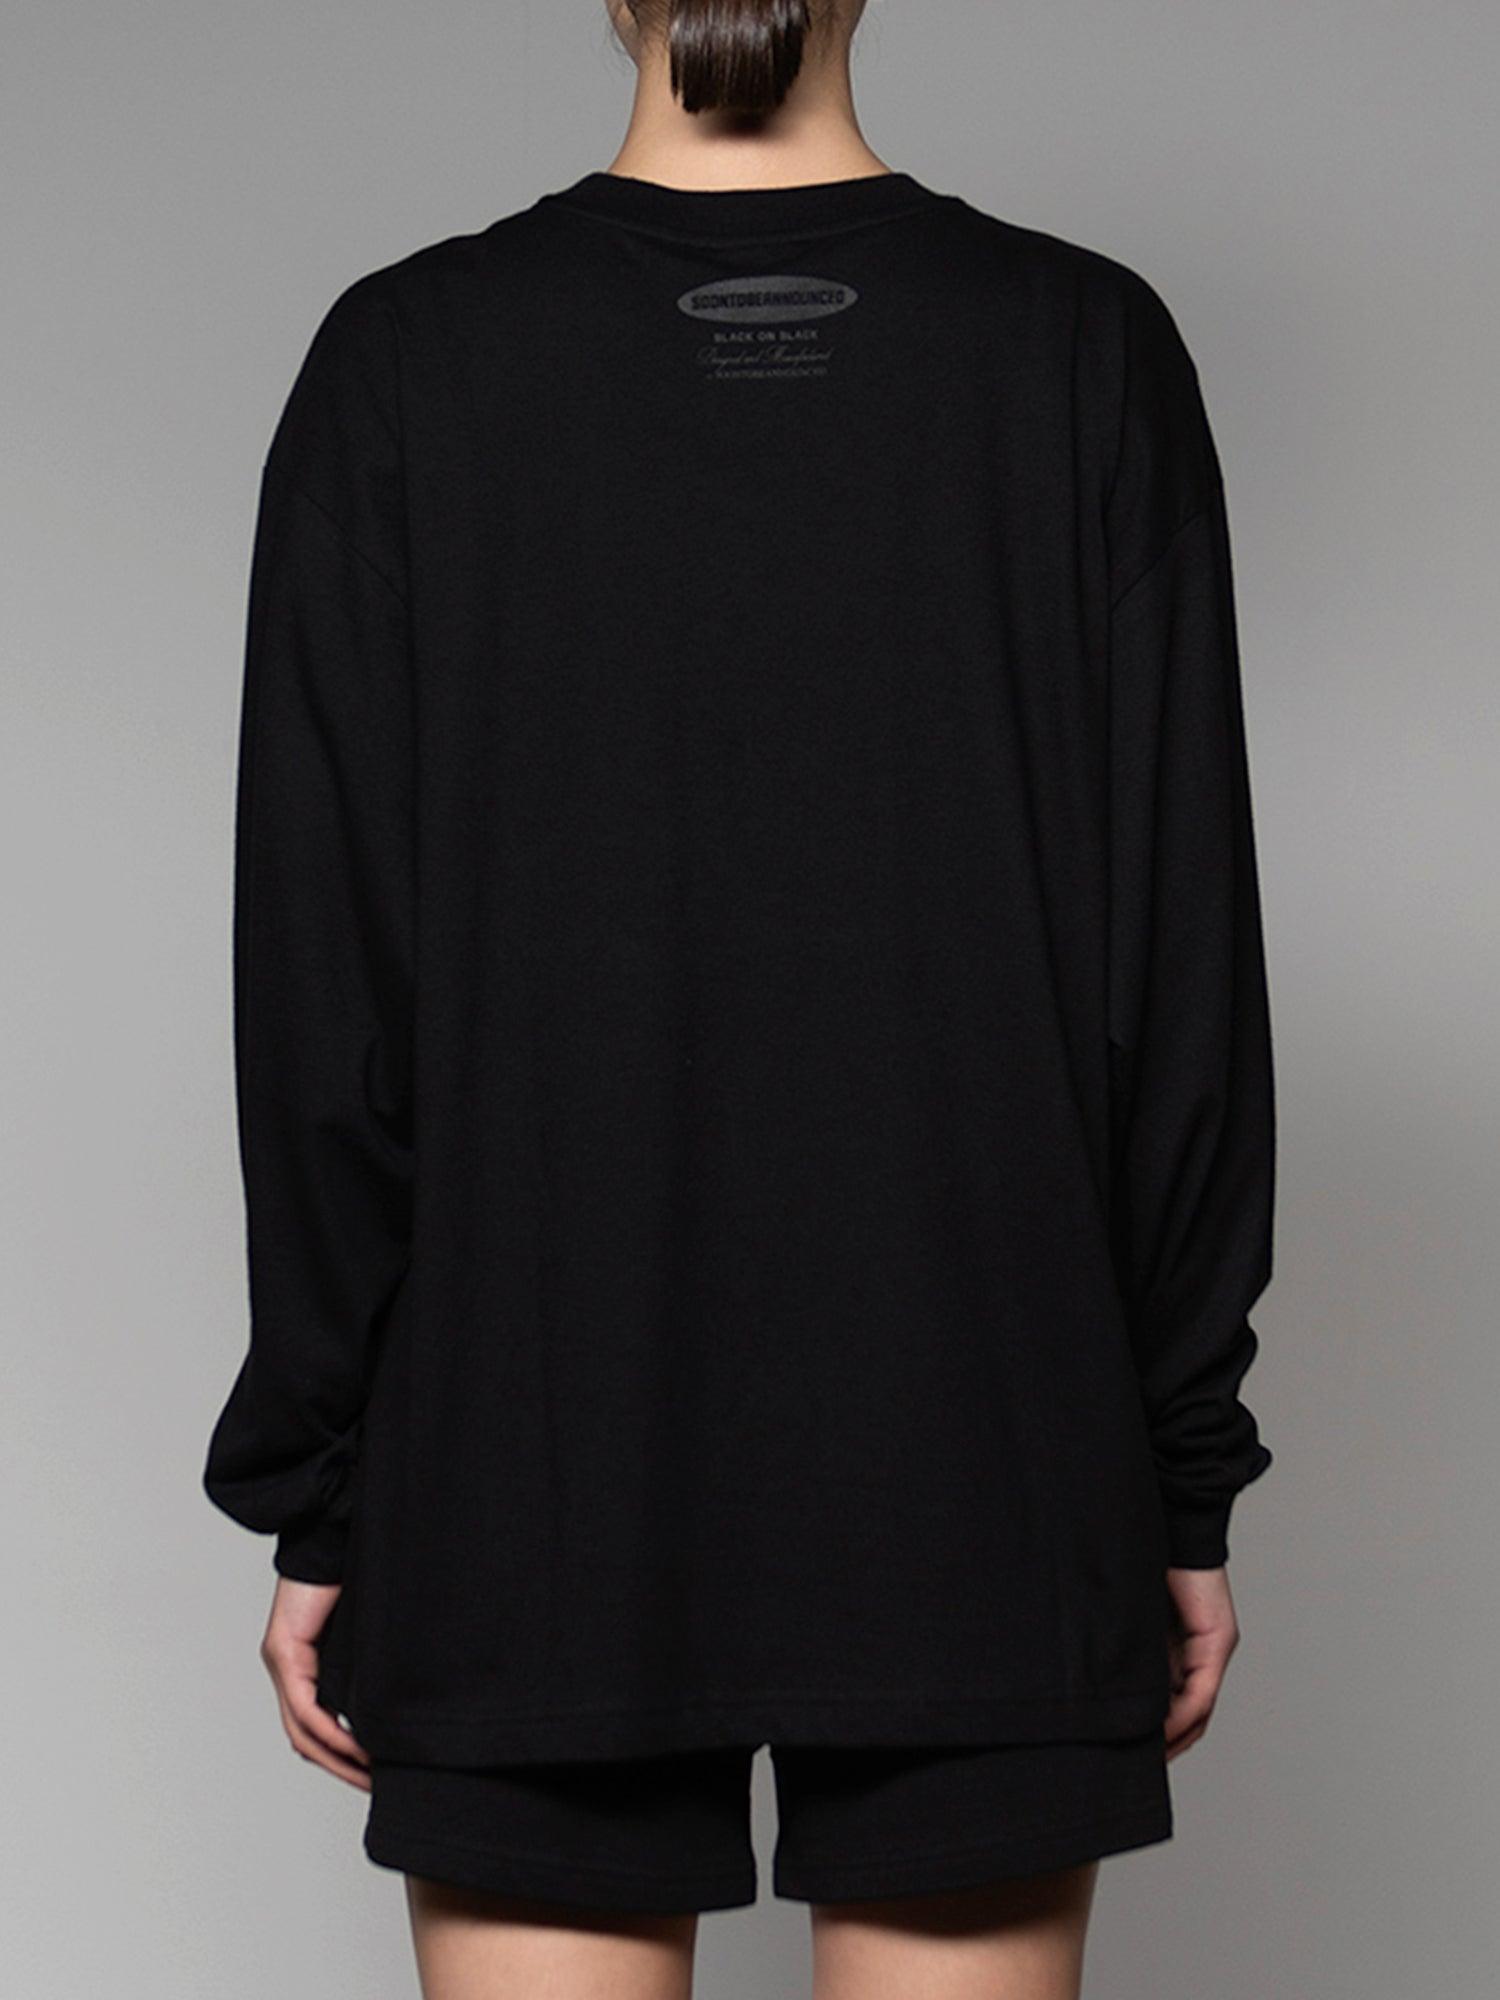 Black on Black L/S T-Shirt - SOON TO BE ANNOUNCED